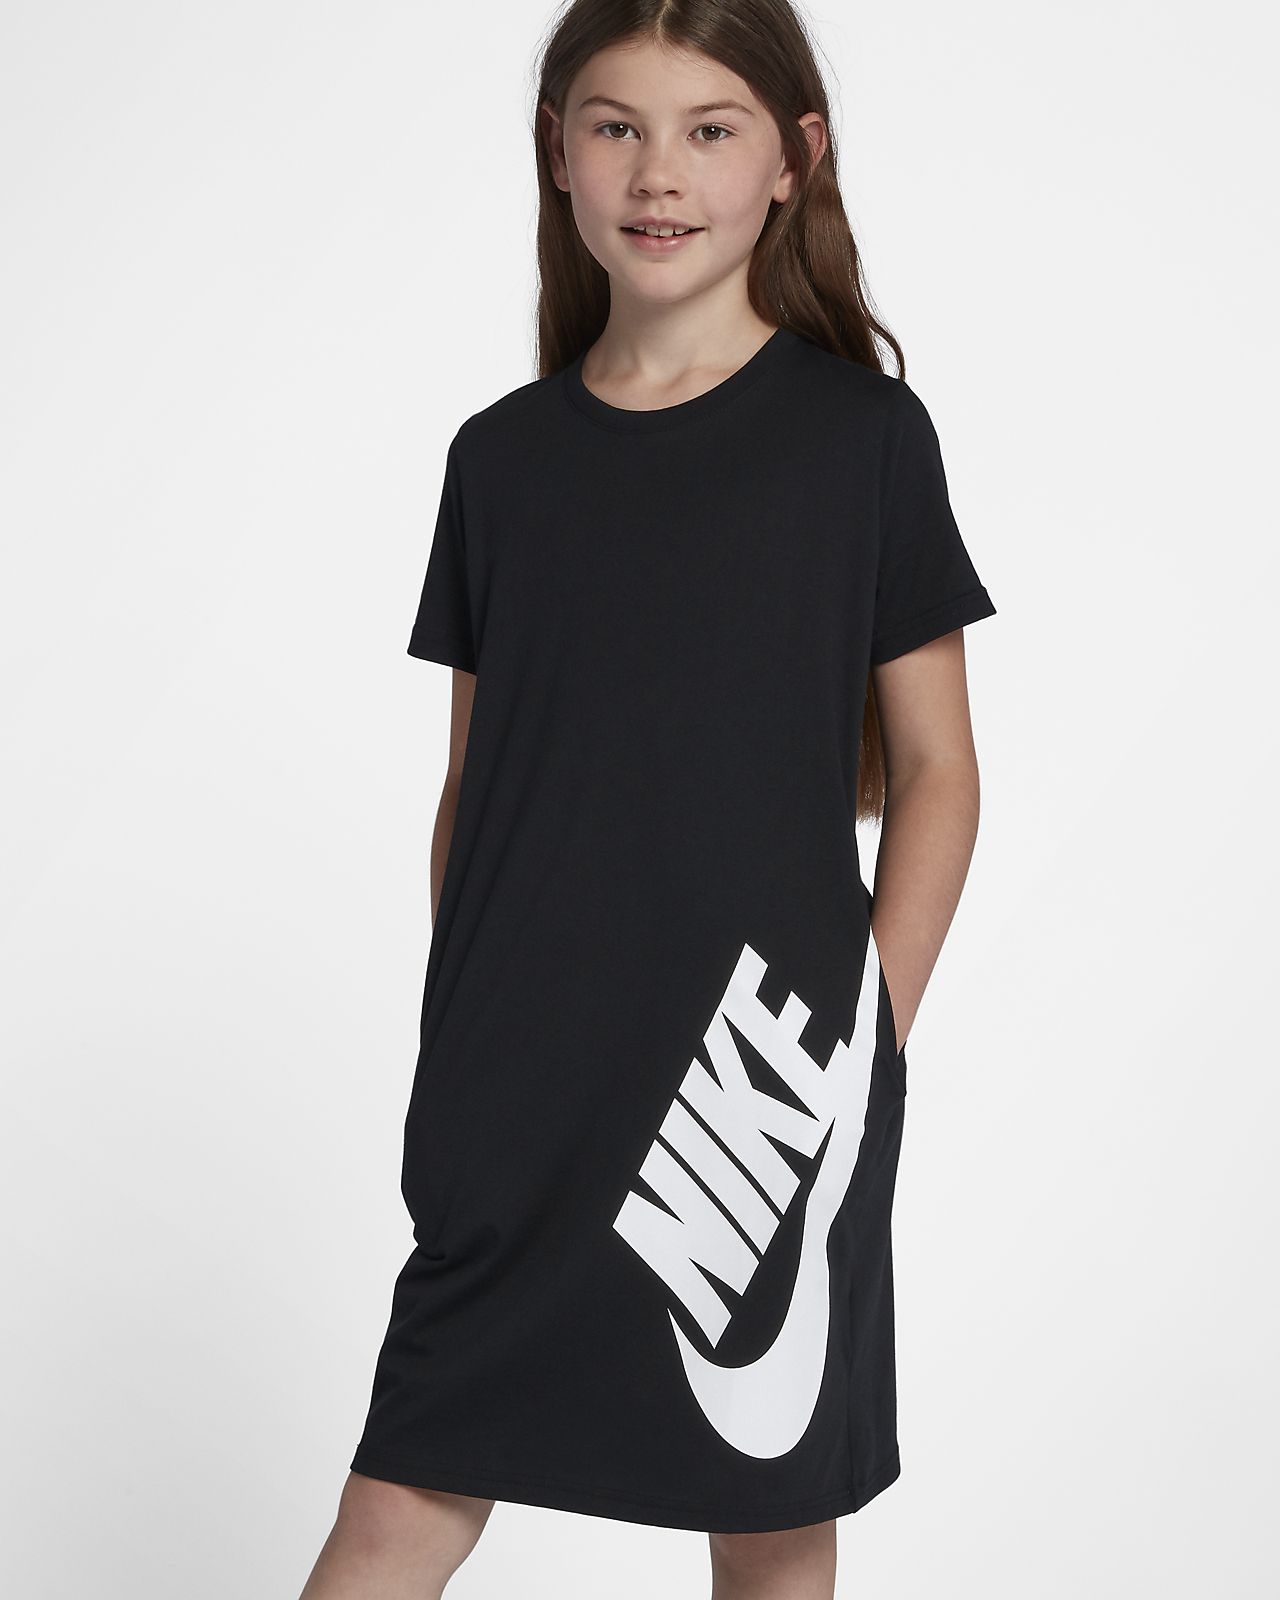 nike outfits for girls